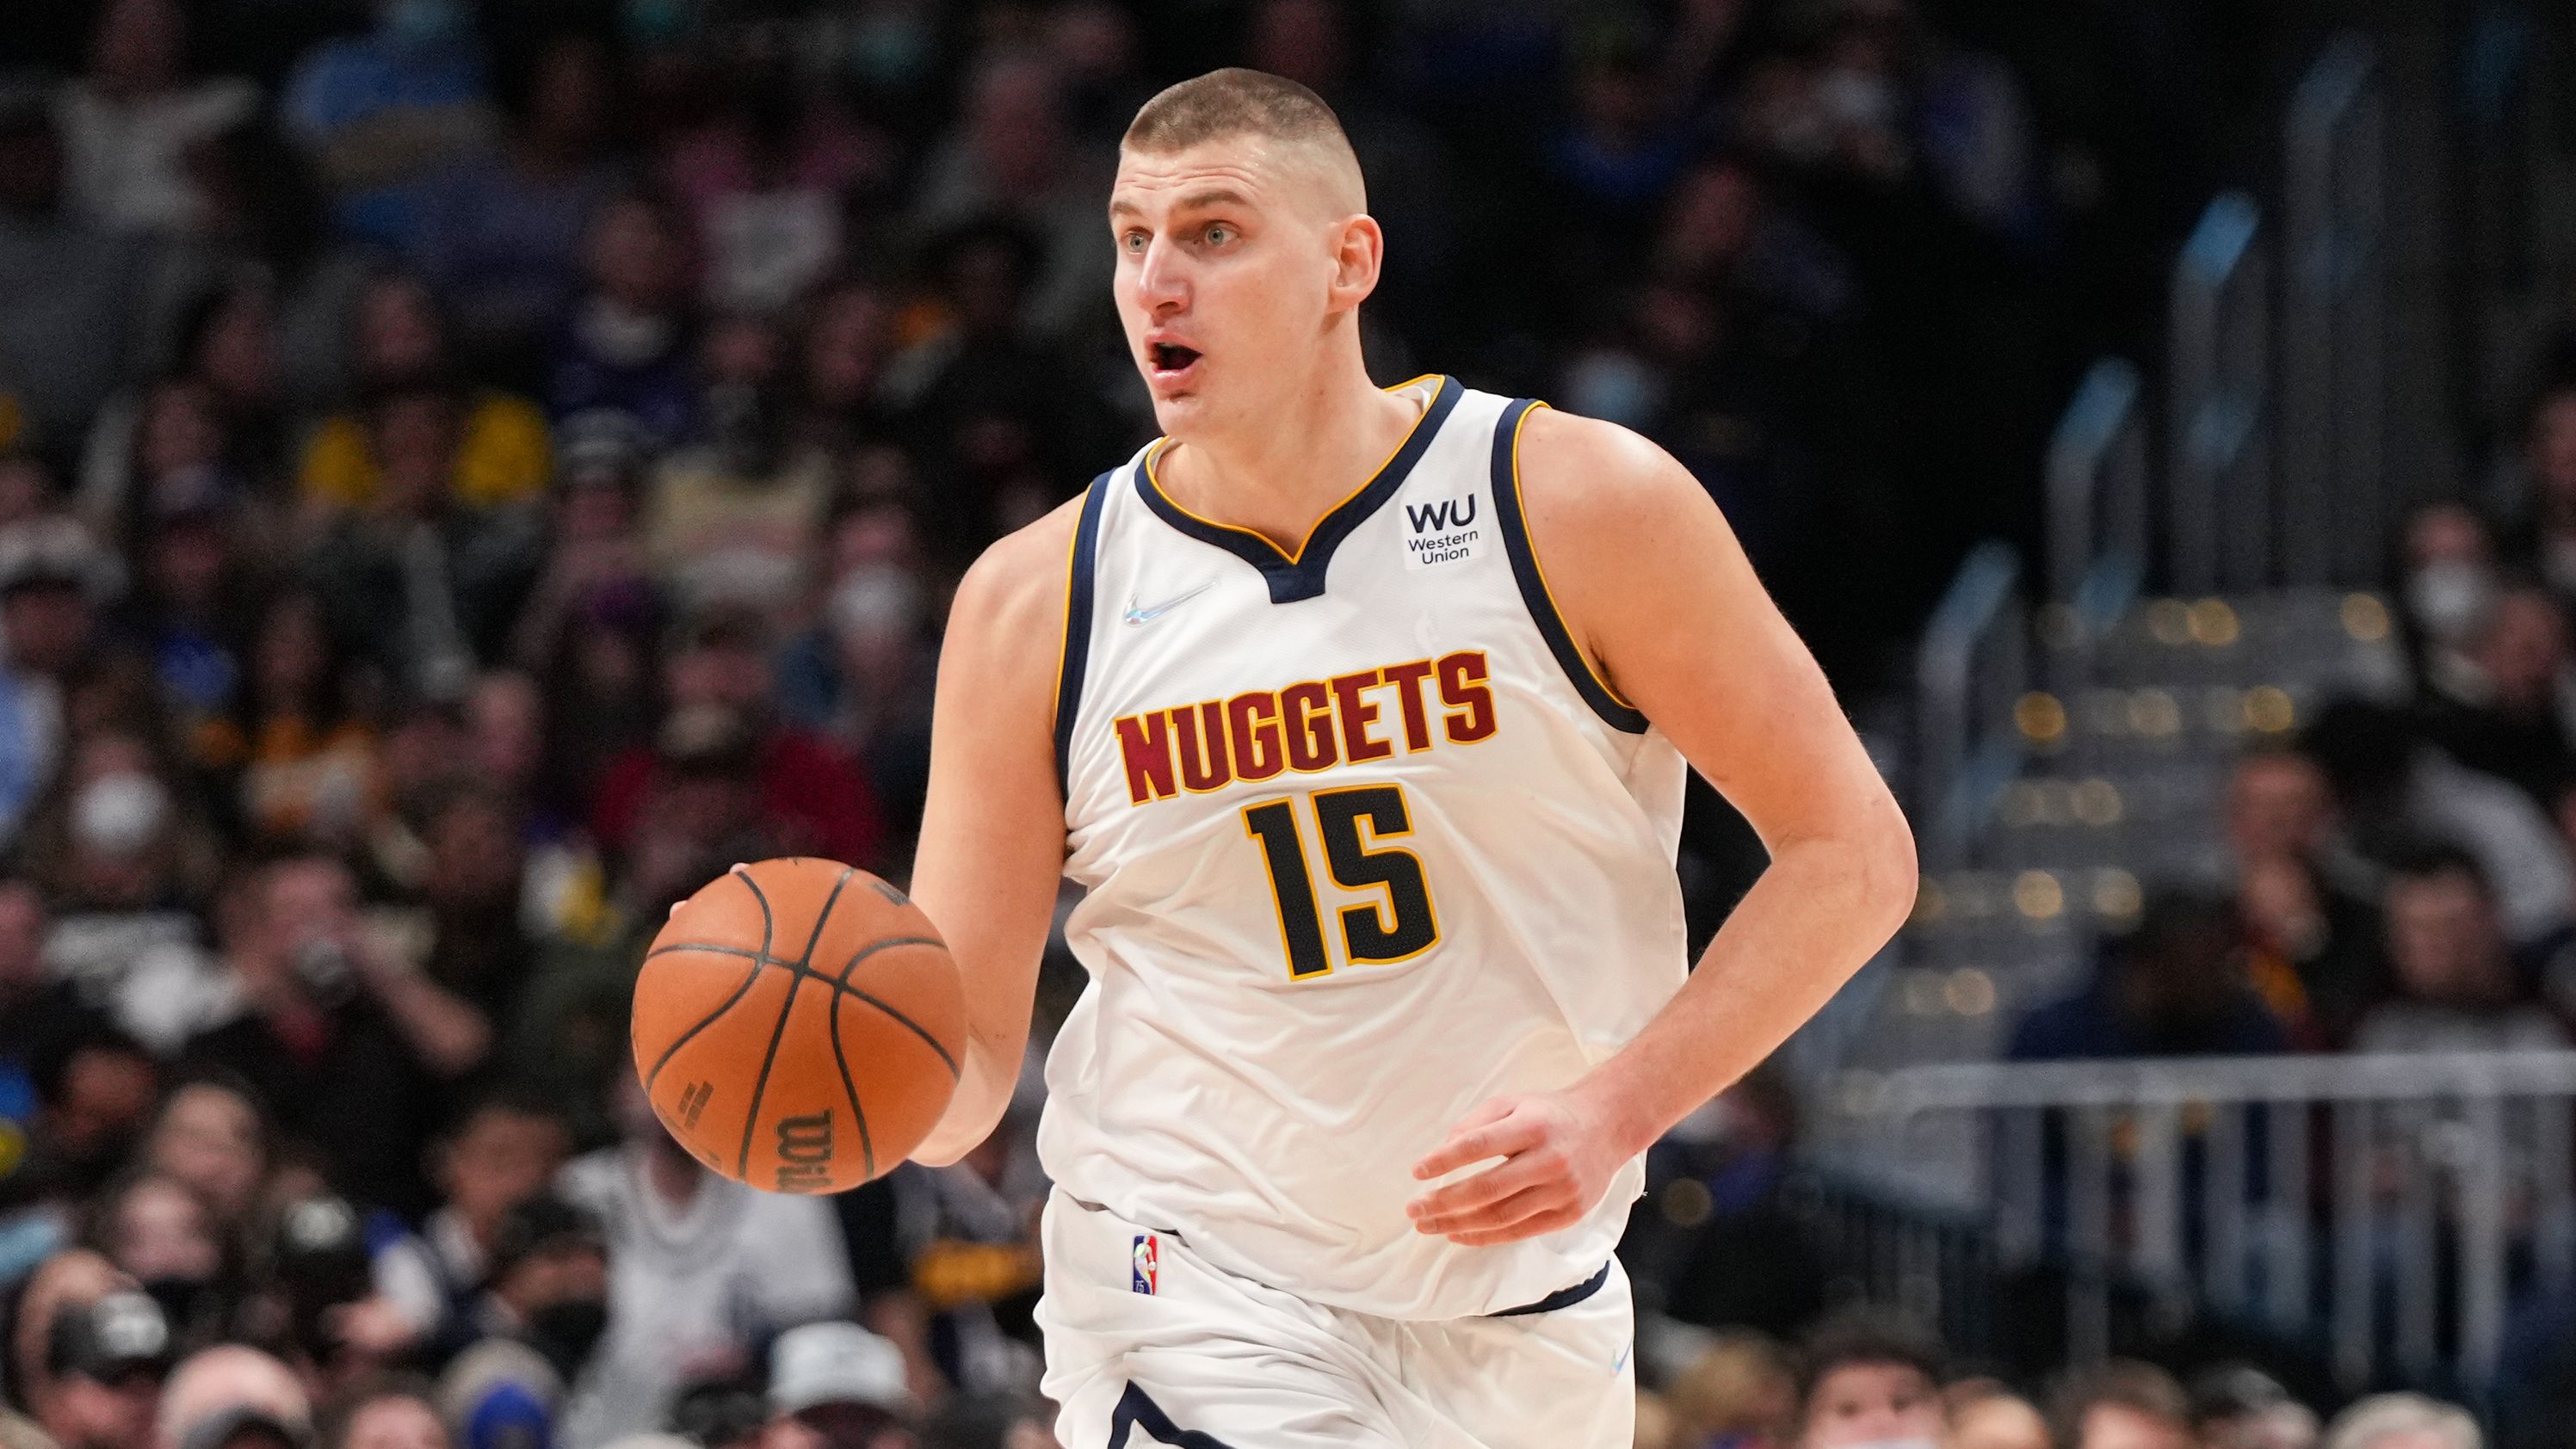 Jokic dribbles against the Memphis Grizzlies at Ball Arena on January 21, 2022.